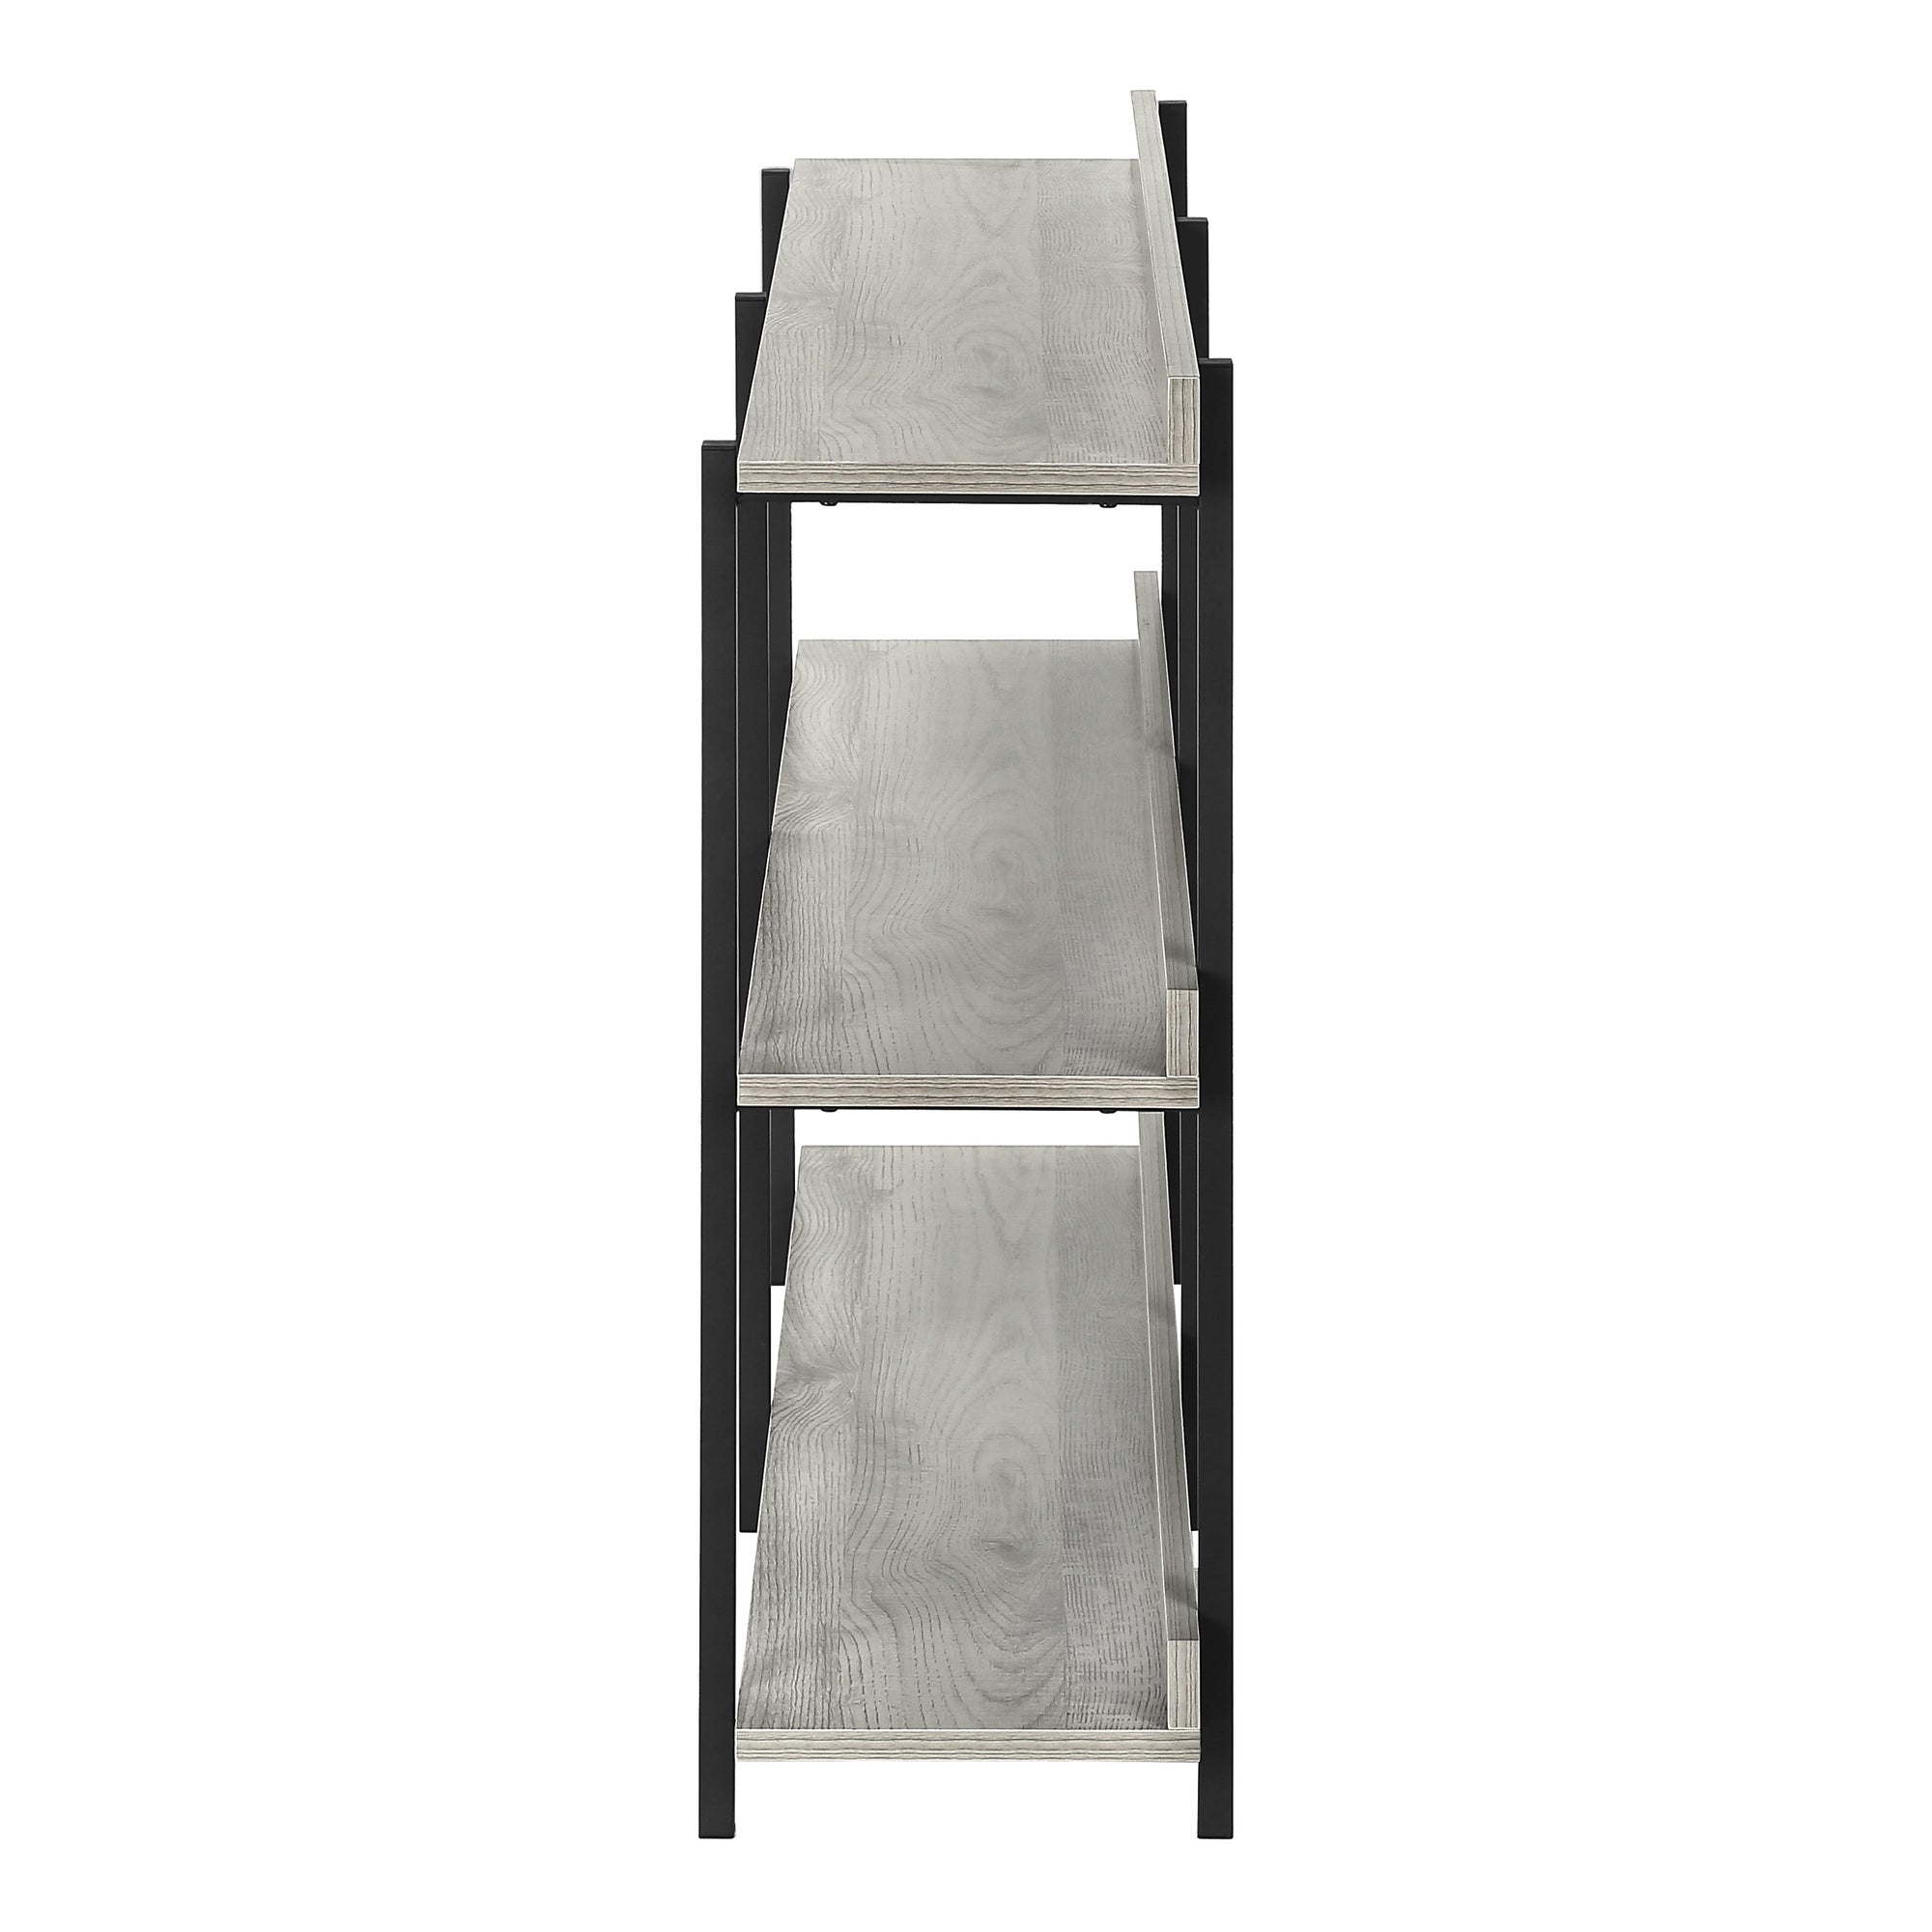 MN-552217    Accent Table, Console, Entryway, Narrow, Sofa, Living Room, Bedroom, Metal Legs, Laminate, Grey, Black, Contemporary, Modern